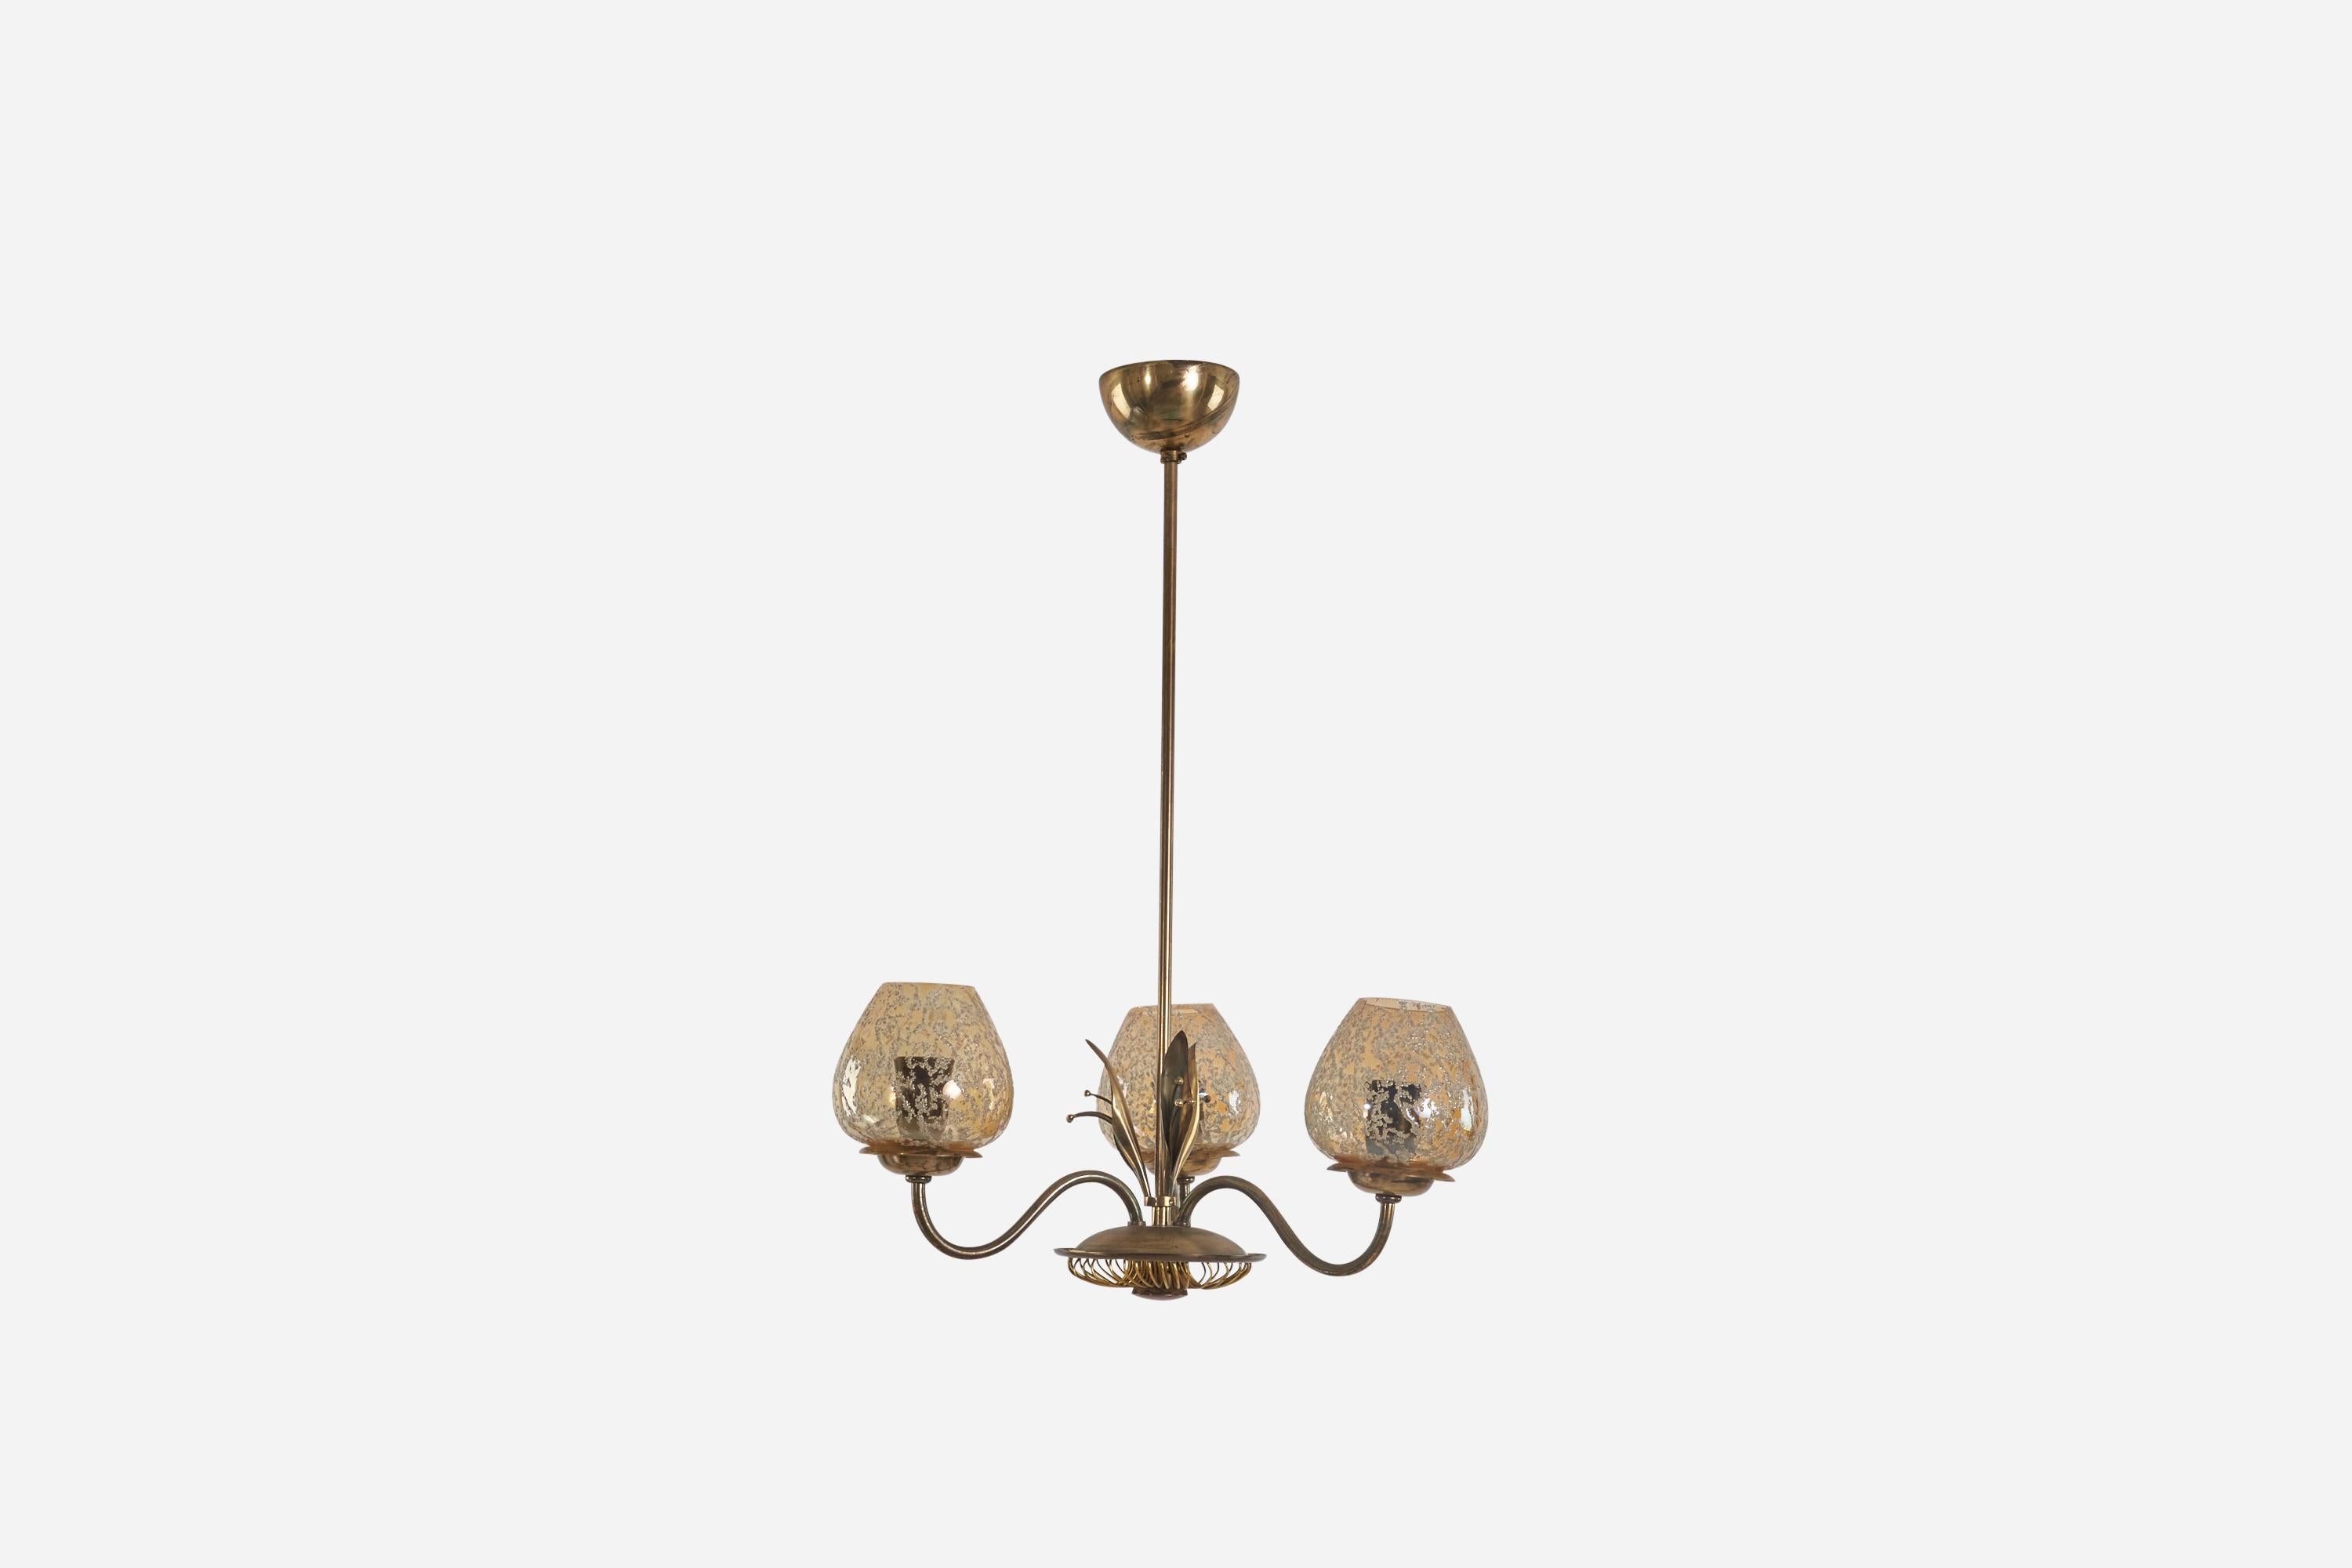 A brass and glass, three-armed chandelier designed and produced in Finland, 1940s. 

Dimensions of Canopy (inches) : 2.25 x 4 x 4 (Height x Width x Depth)

Socket takes standard E-26 medium base bulb.

There is no maximum wattage stated on the